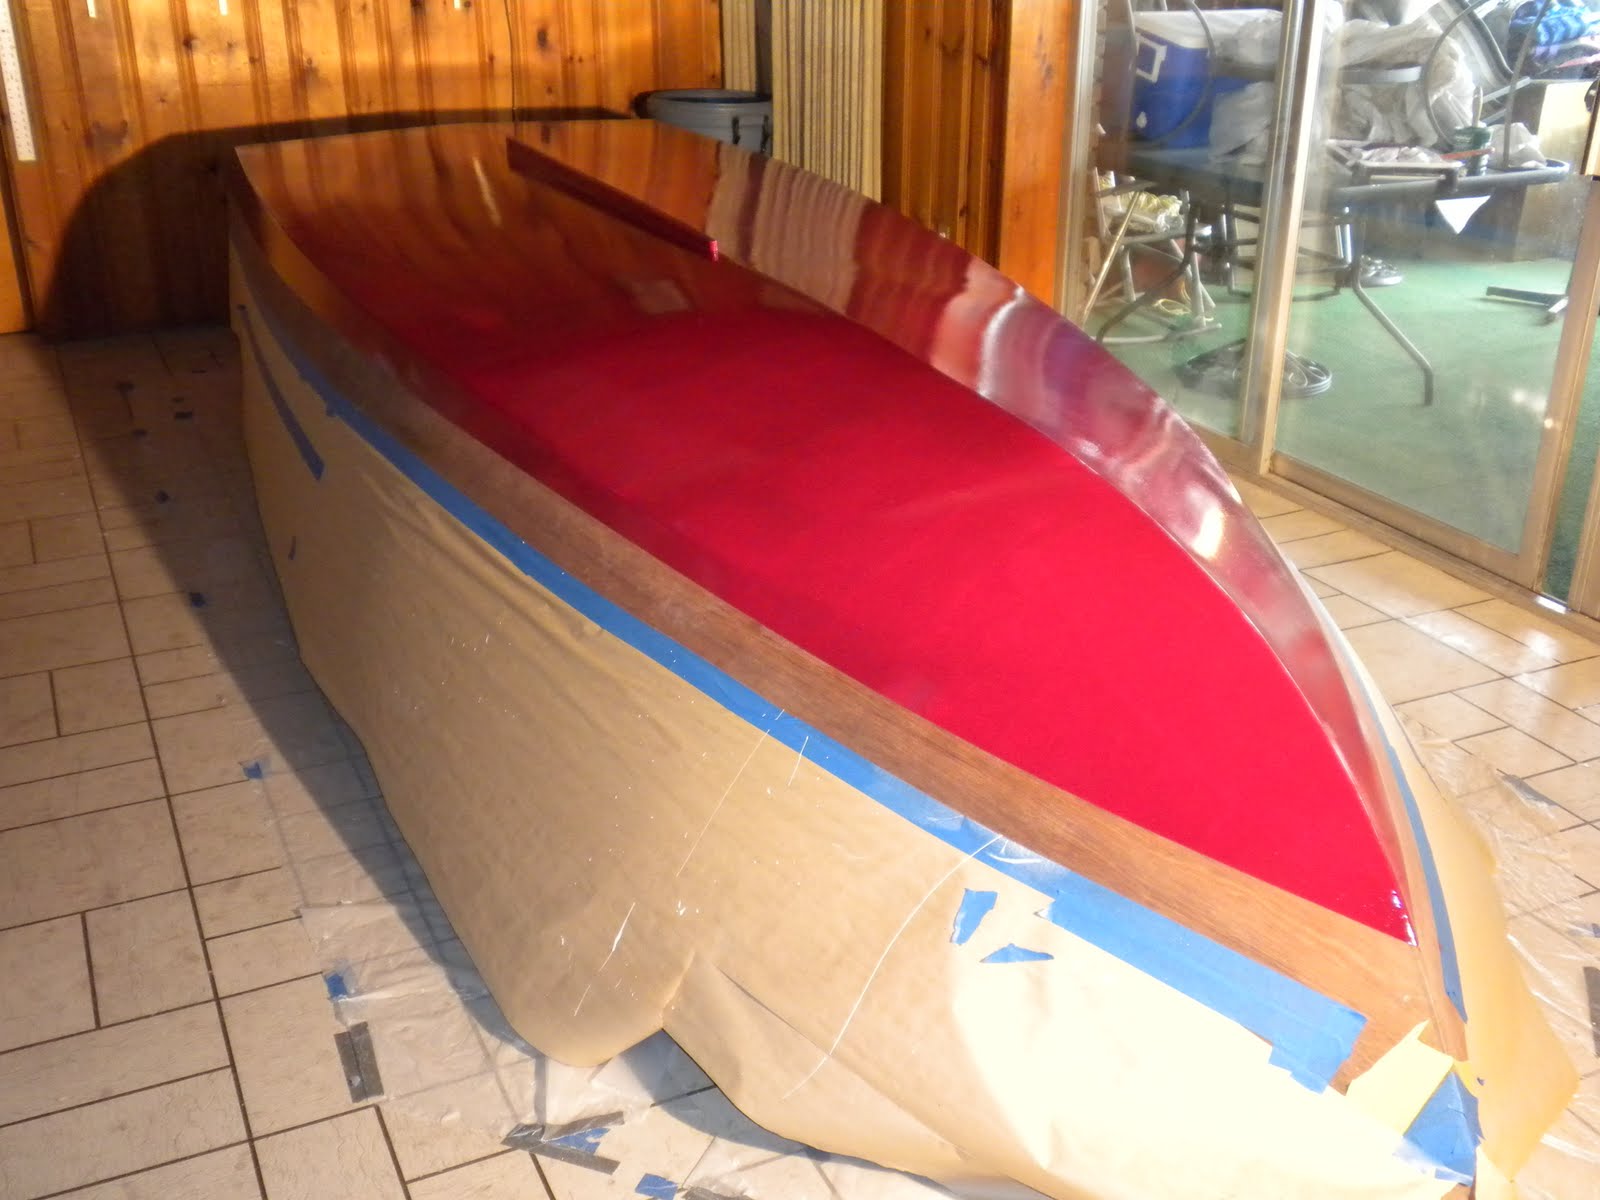 ted's wood boat: here is the color